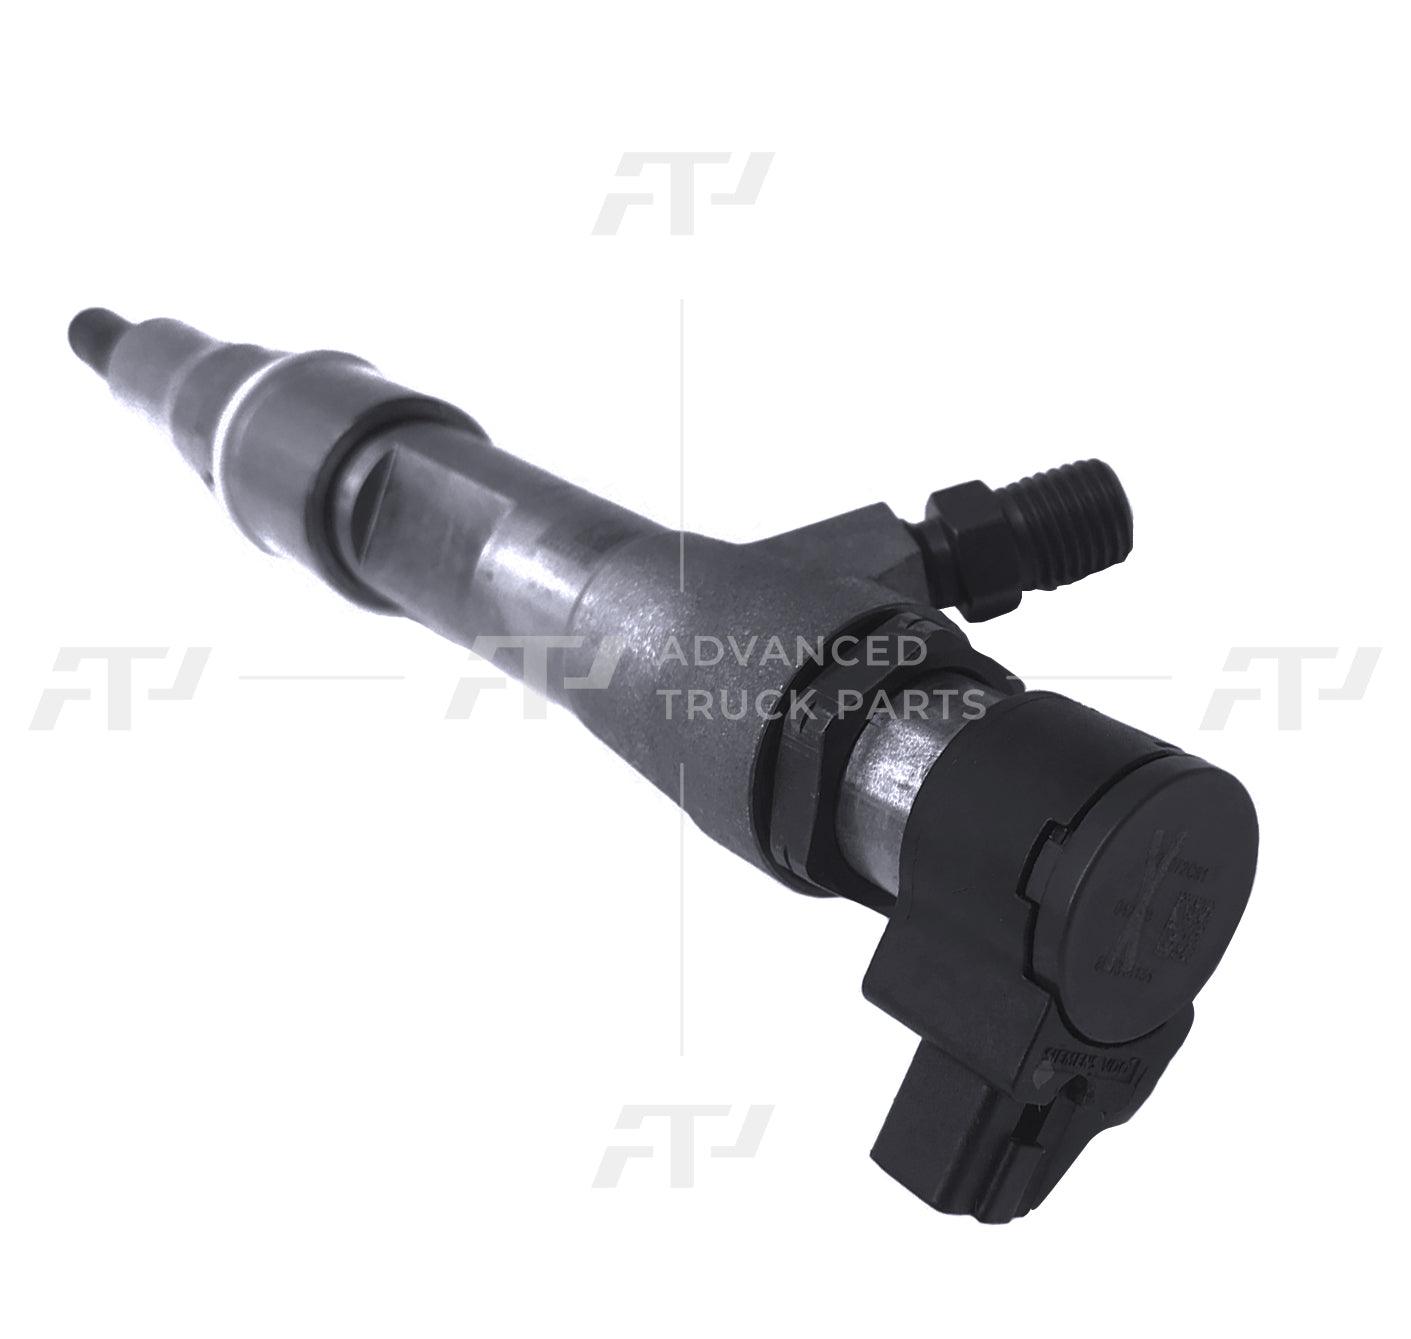 Inj230R Napa Fuel Injector For 08-10 Ford F250 3/4 Ton Pick Up No Core Charge - ADVANCED TRUCK PARTS